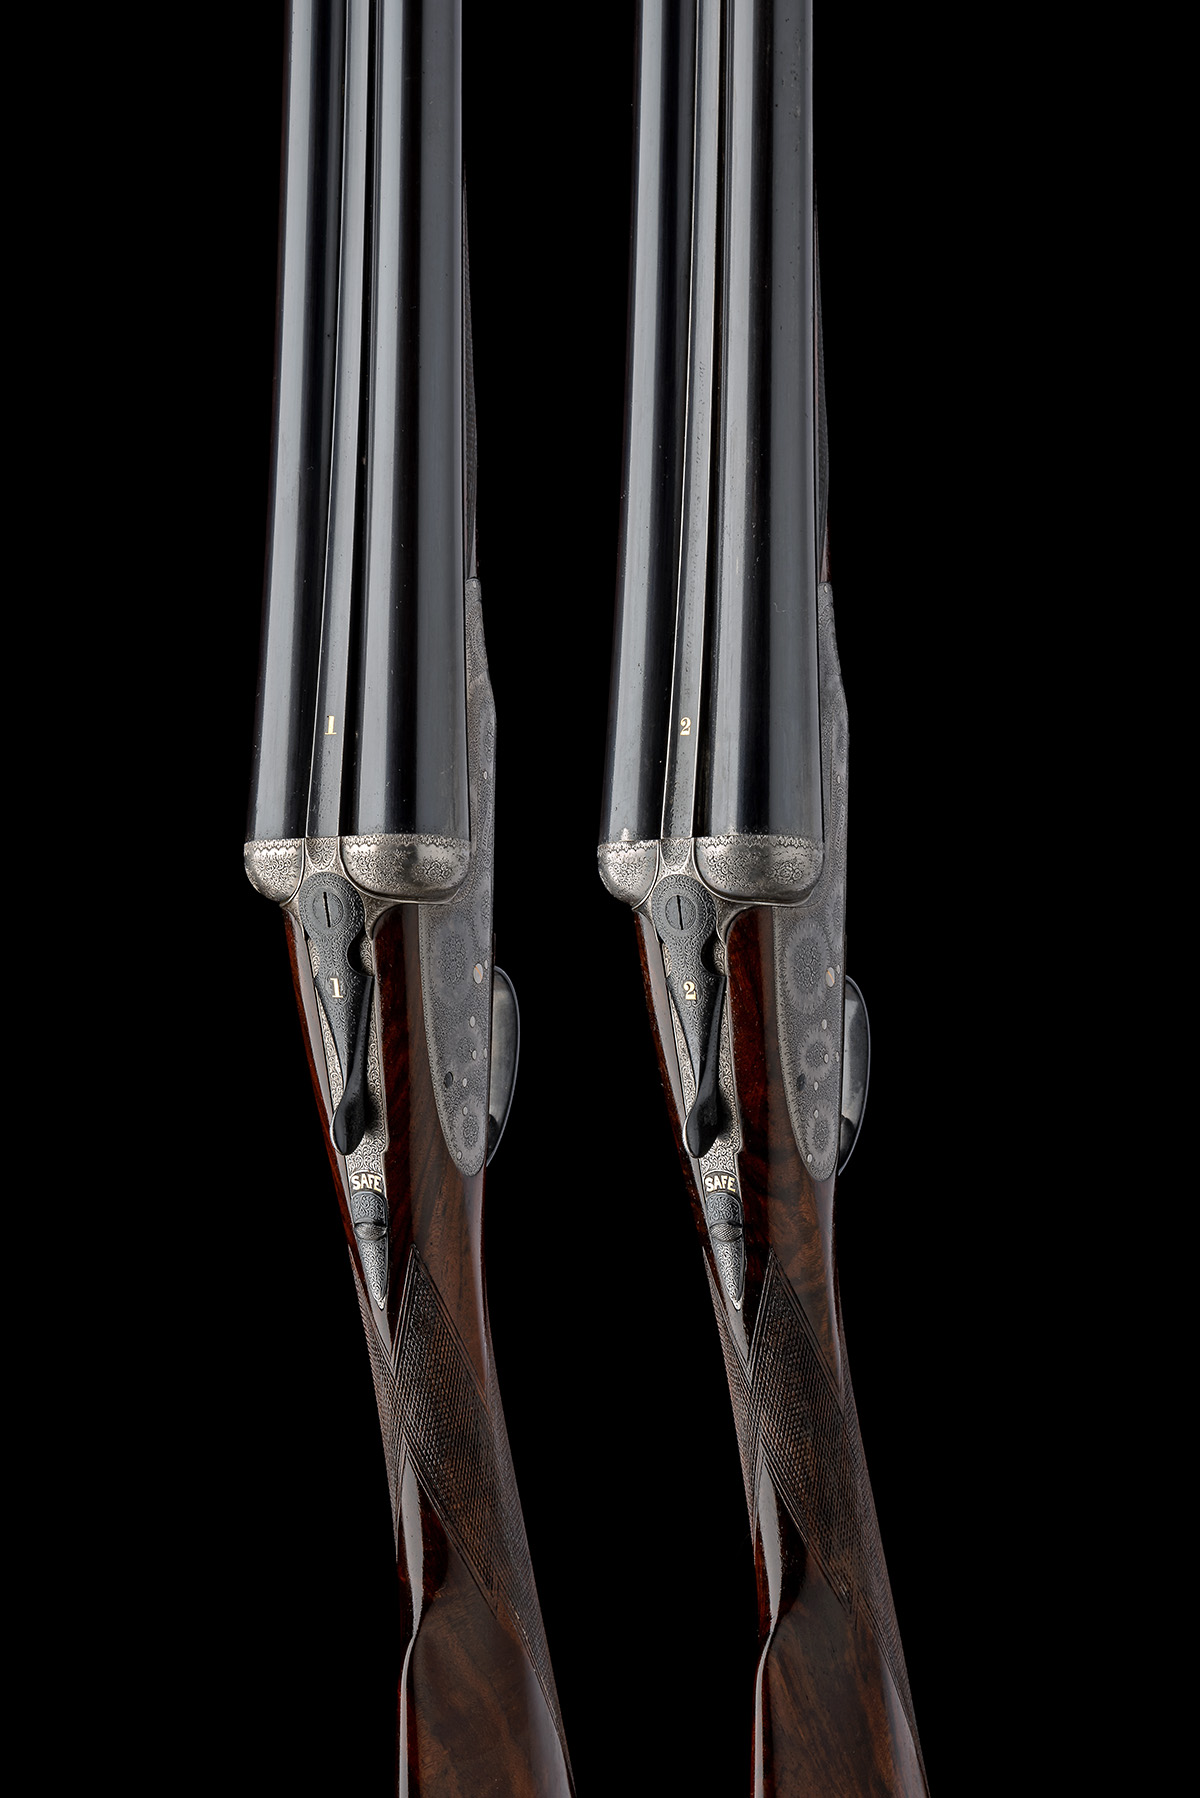 BOSS & CO. A PAIR OF 12-BORE EASY-OPENING ROUNDED-BAR SINGLE-TRIGGER SIDELOCK EJECTORS, serial no. - Image 6 of 11